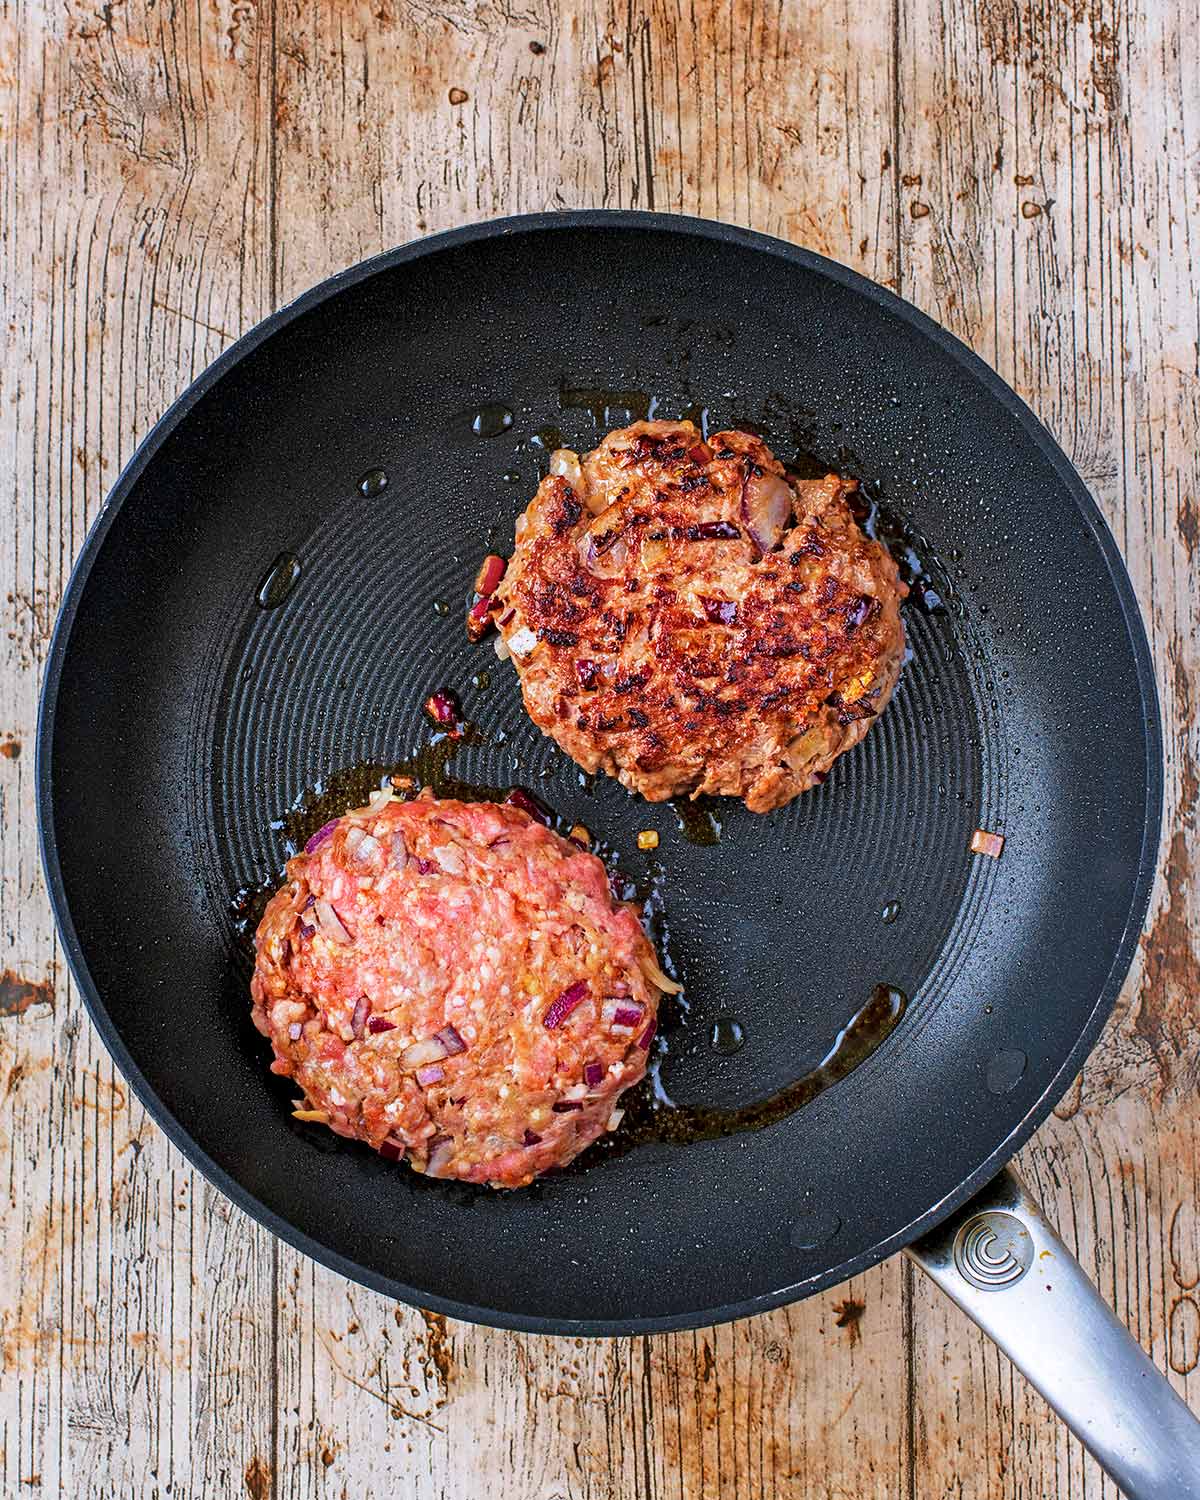 A frying pan with two burgers cooking in it. One has been flipped over to show the cooked side.